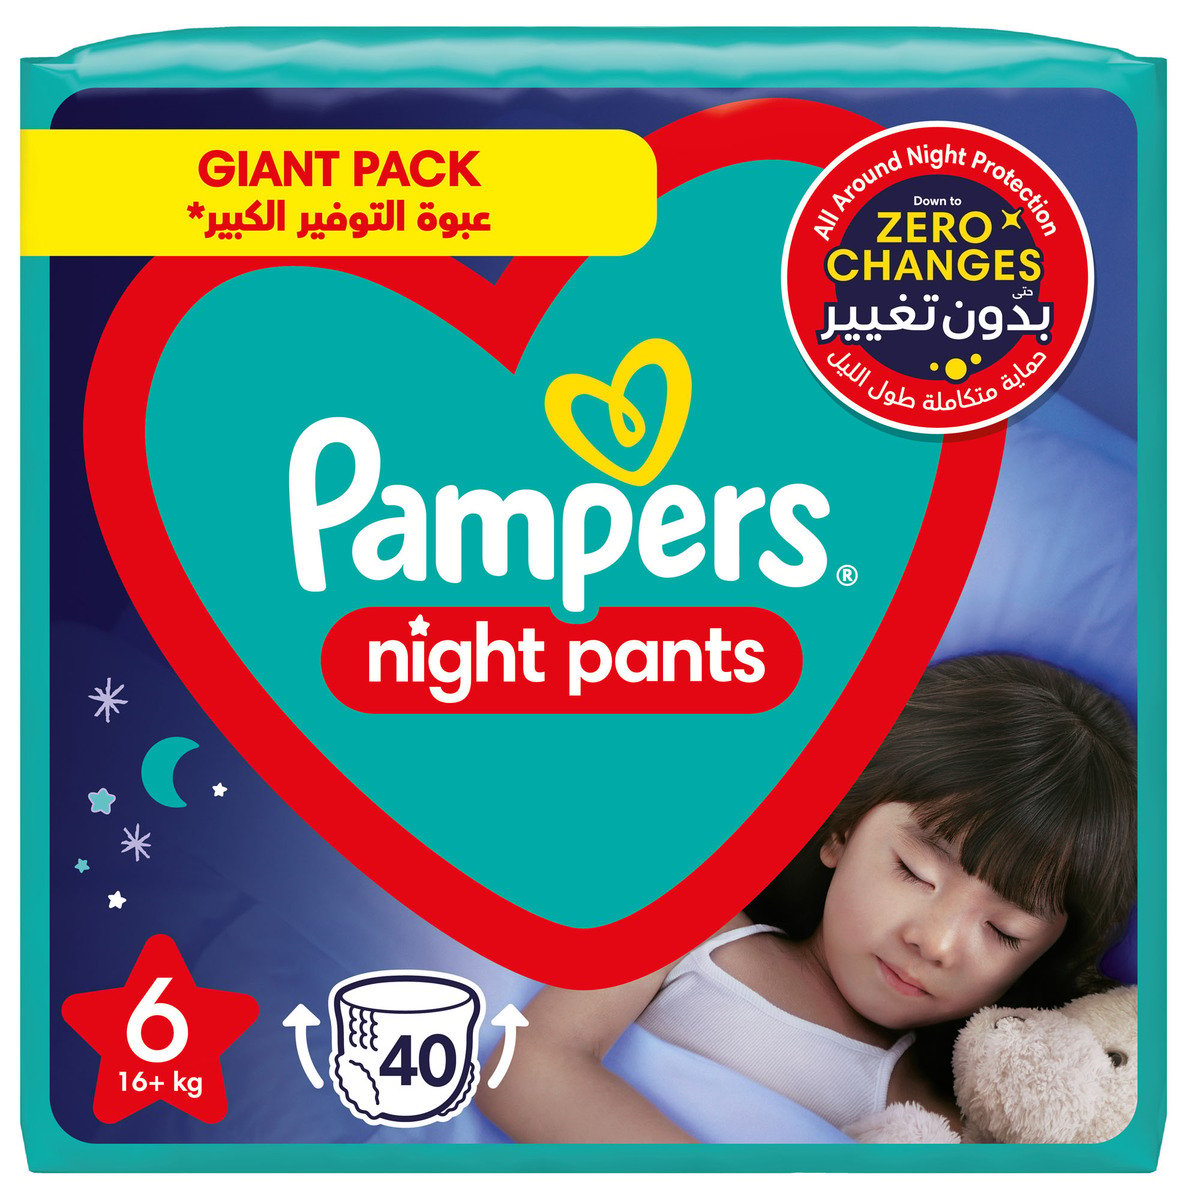 Pampers Diapers Baby-Dry Night Pants Size 6, 16+kg 40pcs